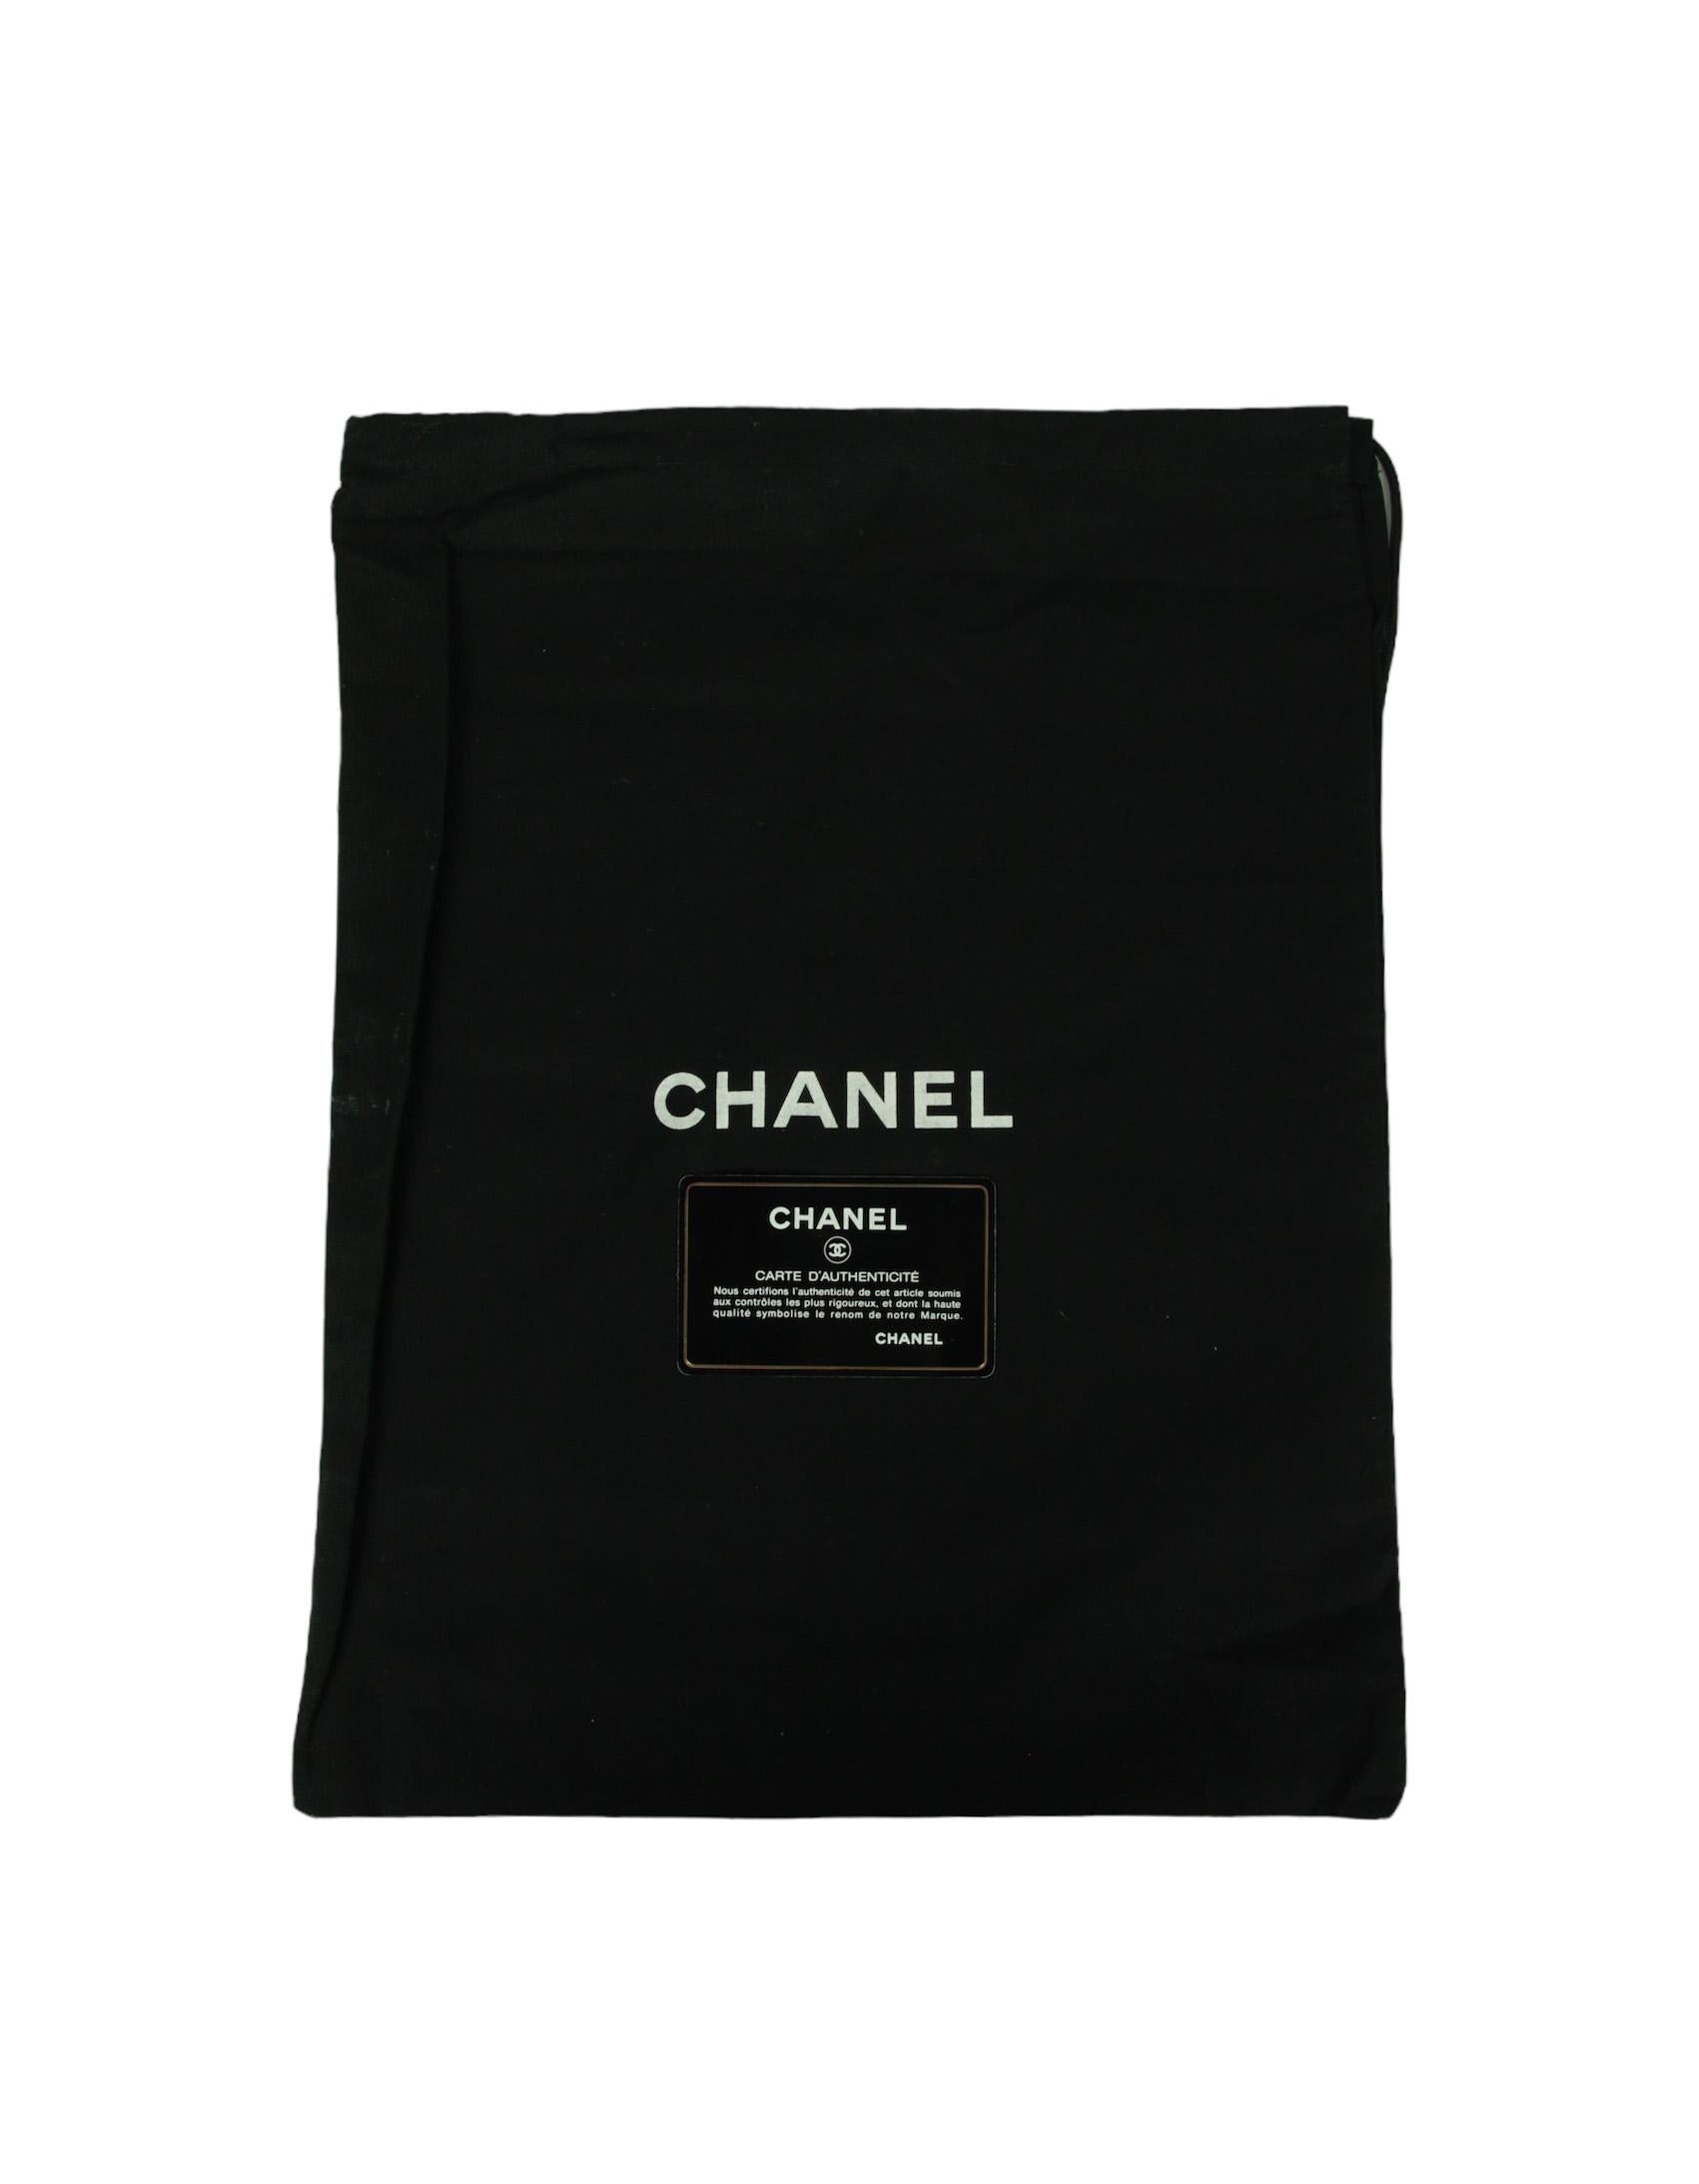 Chanel Black Calfskin Leather Quilted 2.55 Reissue 226 Flap Bag For Sale 6